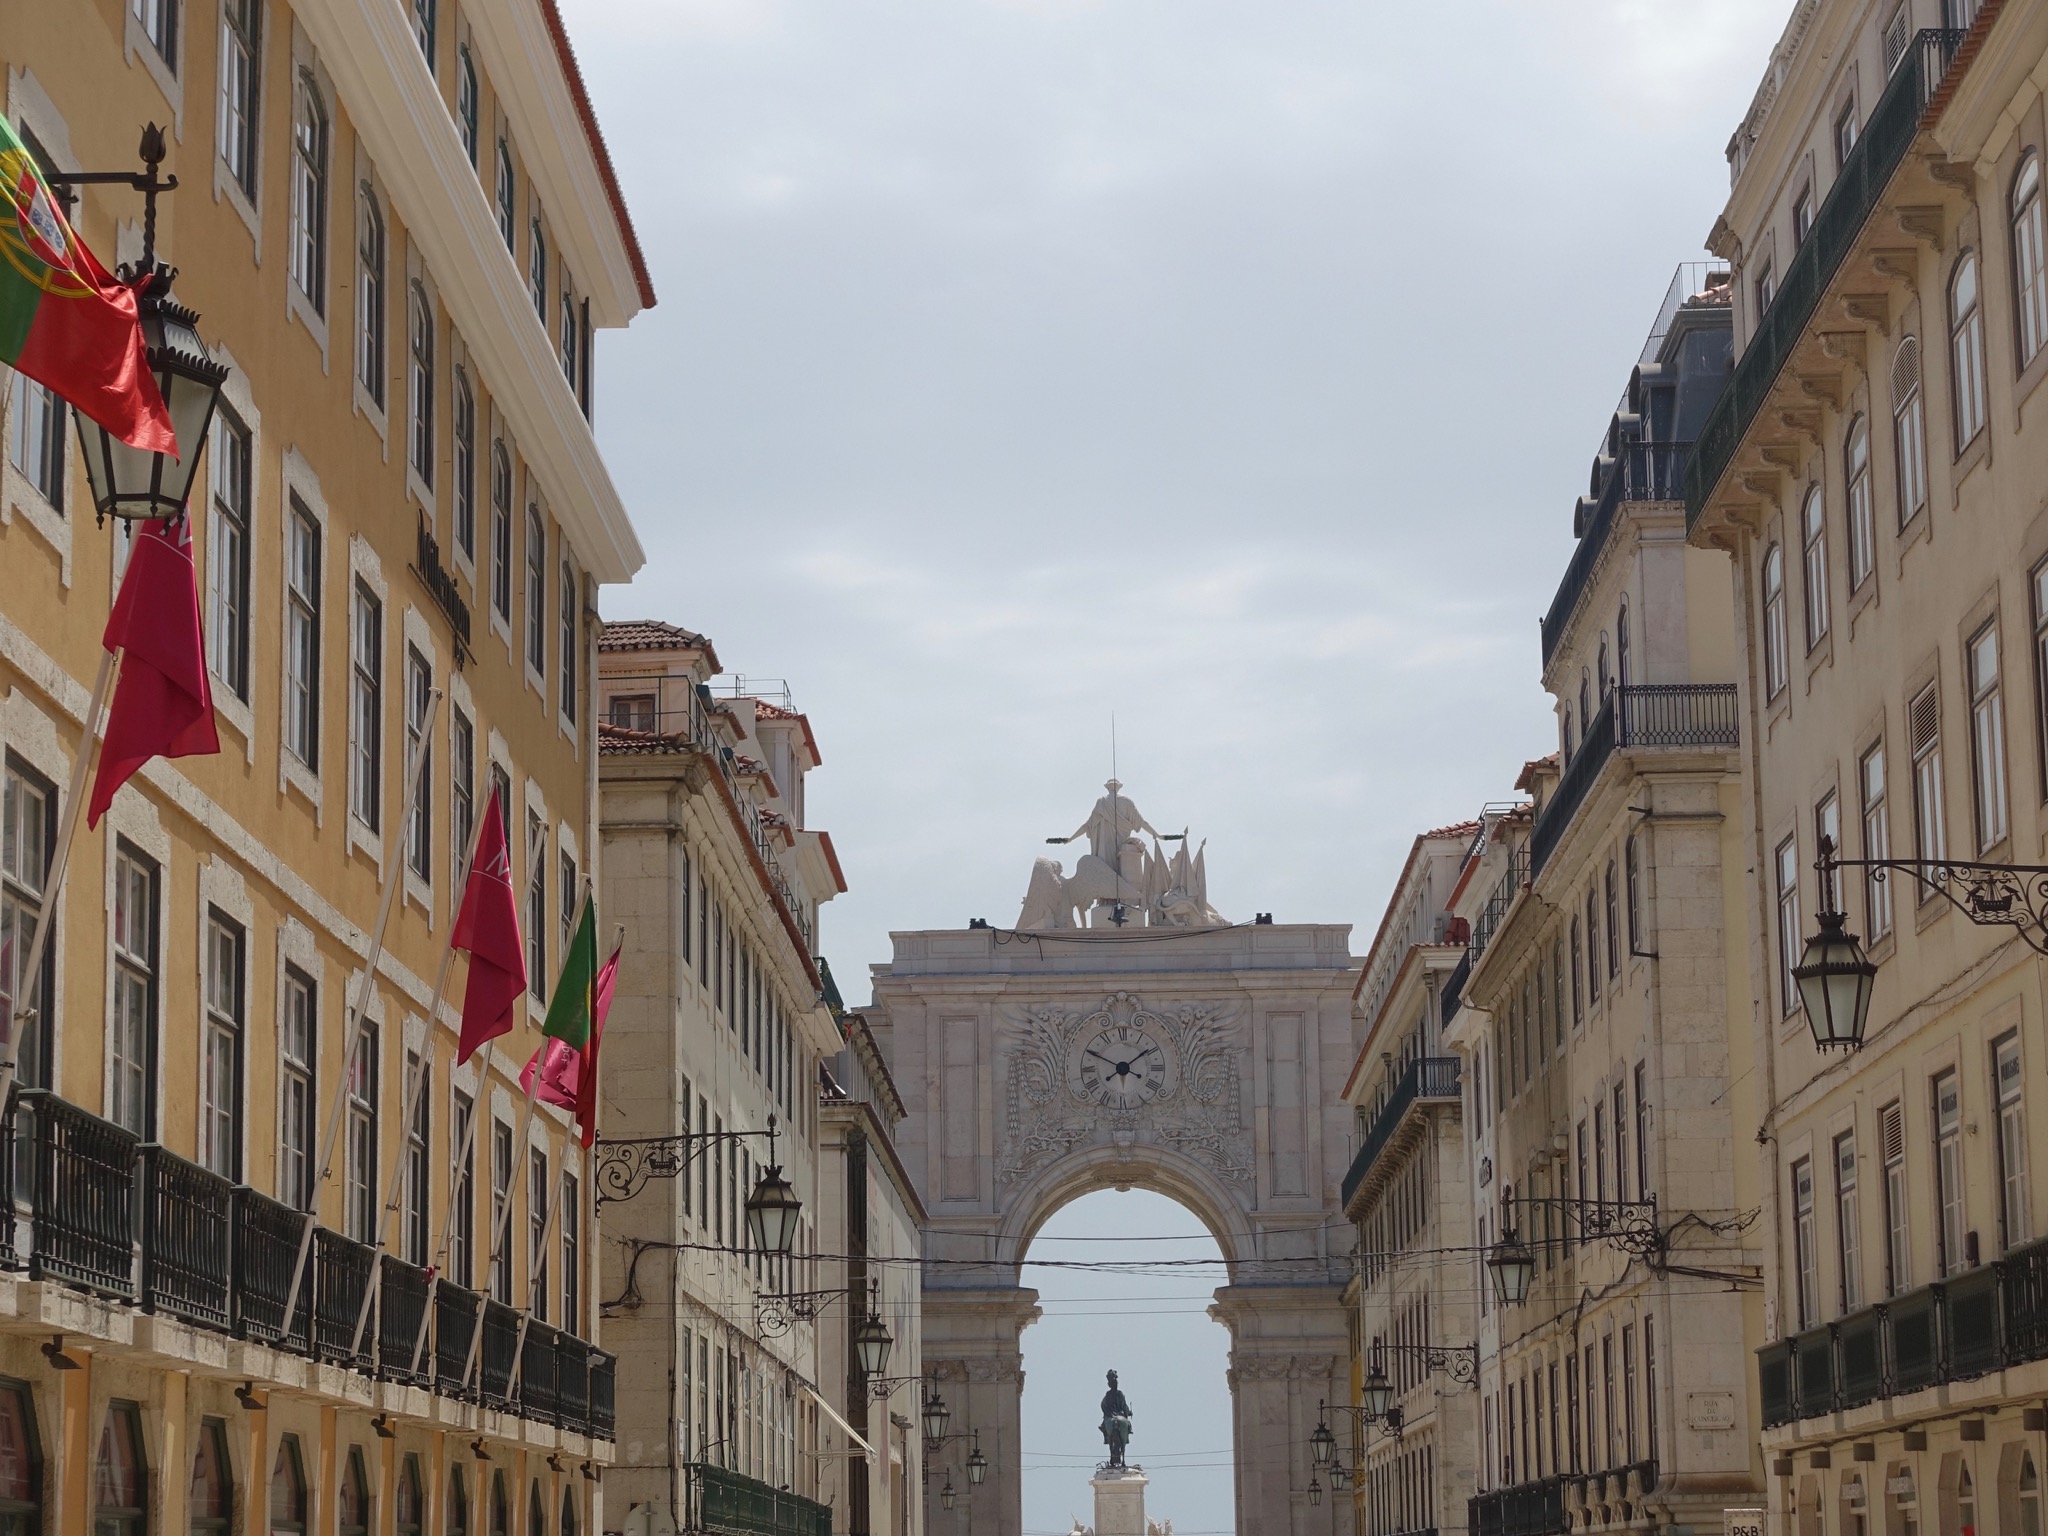 Photo 45 of 86 from the album Highlights Lisbon 2015.